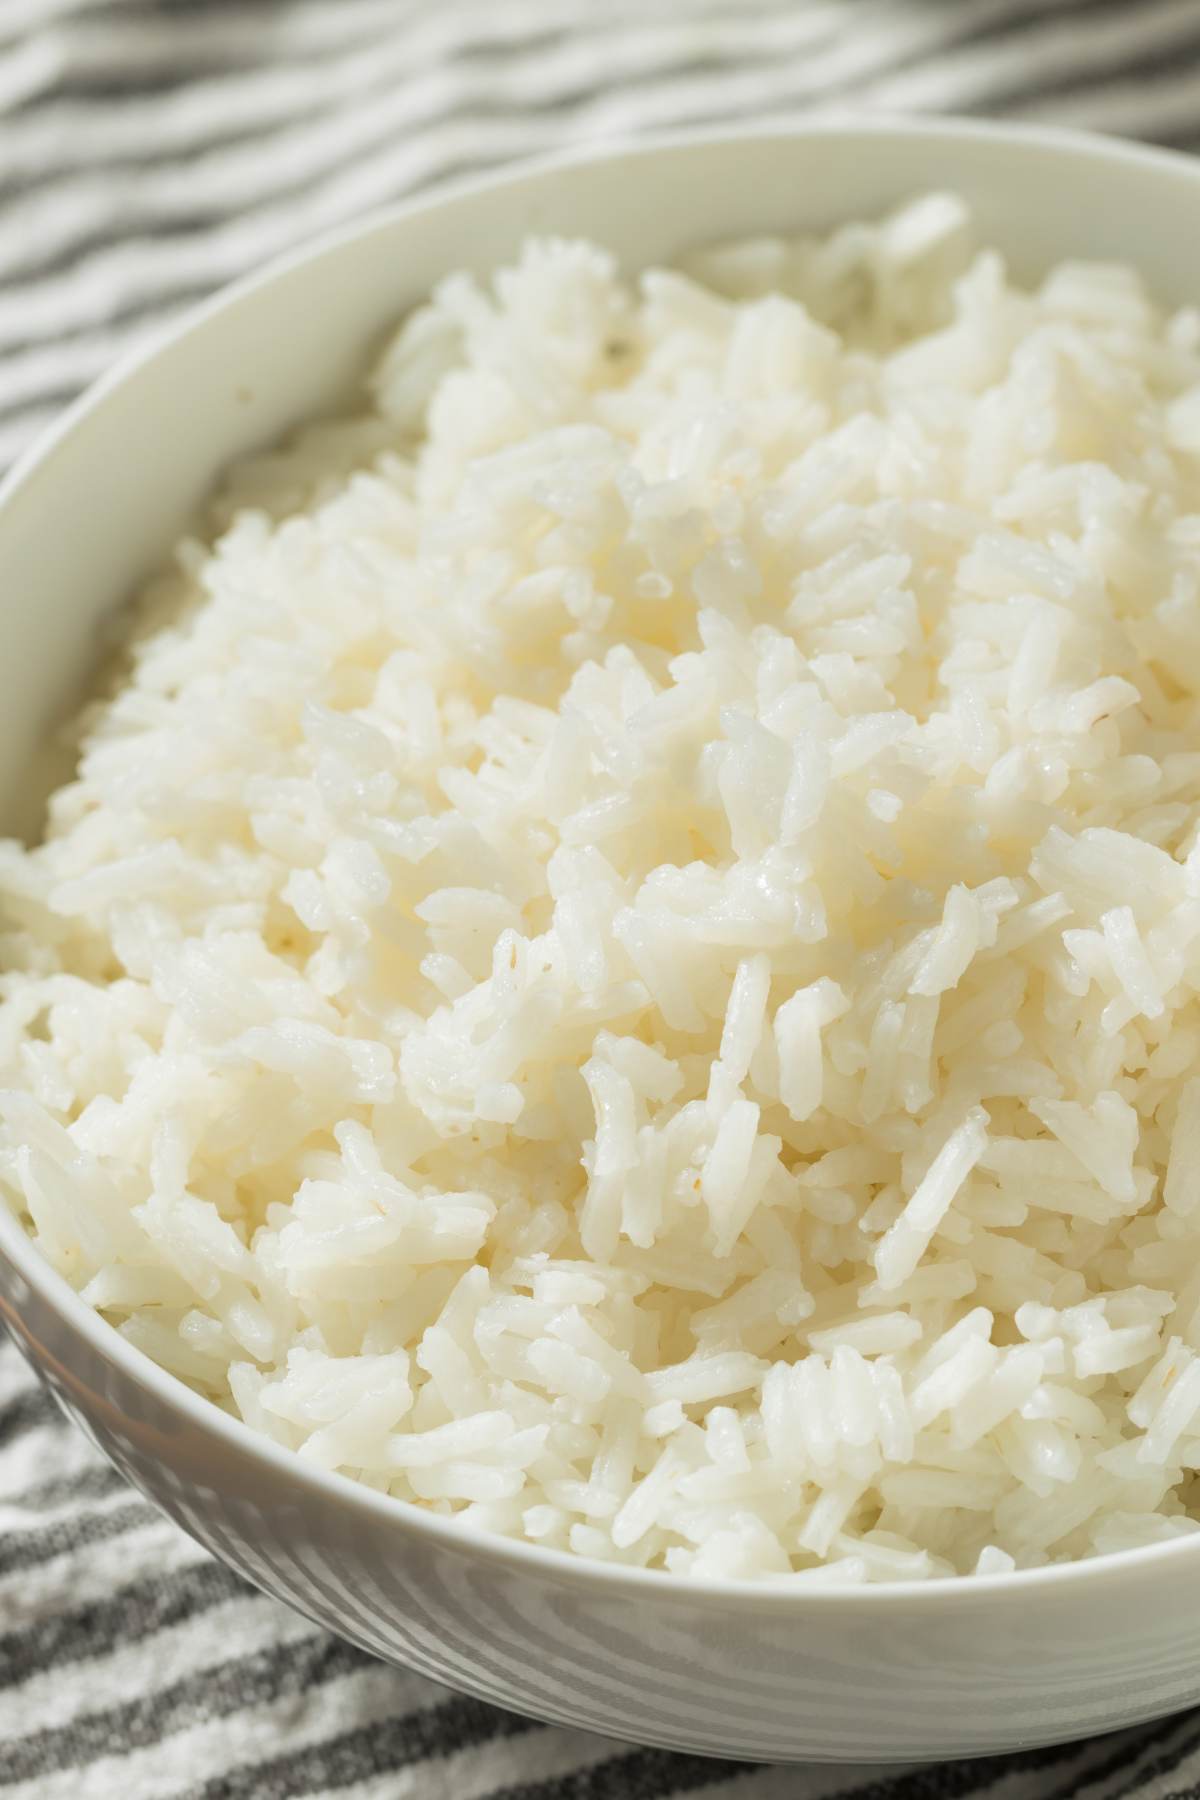 Is white rice keto-friend? How many carbs and net carbs are in white rice? People following the keto diet may wonder if white rice is a suitable food to eat.